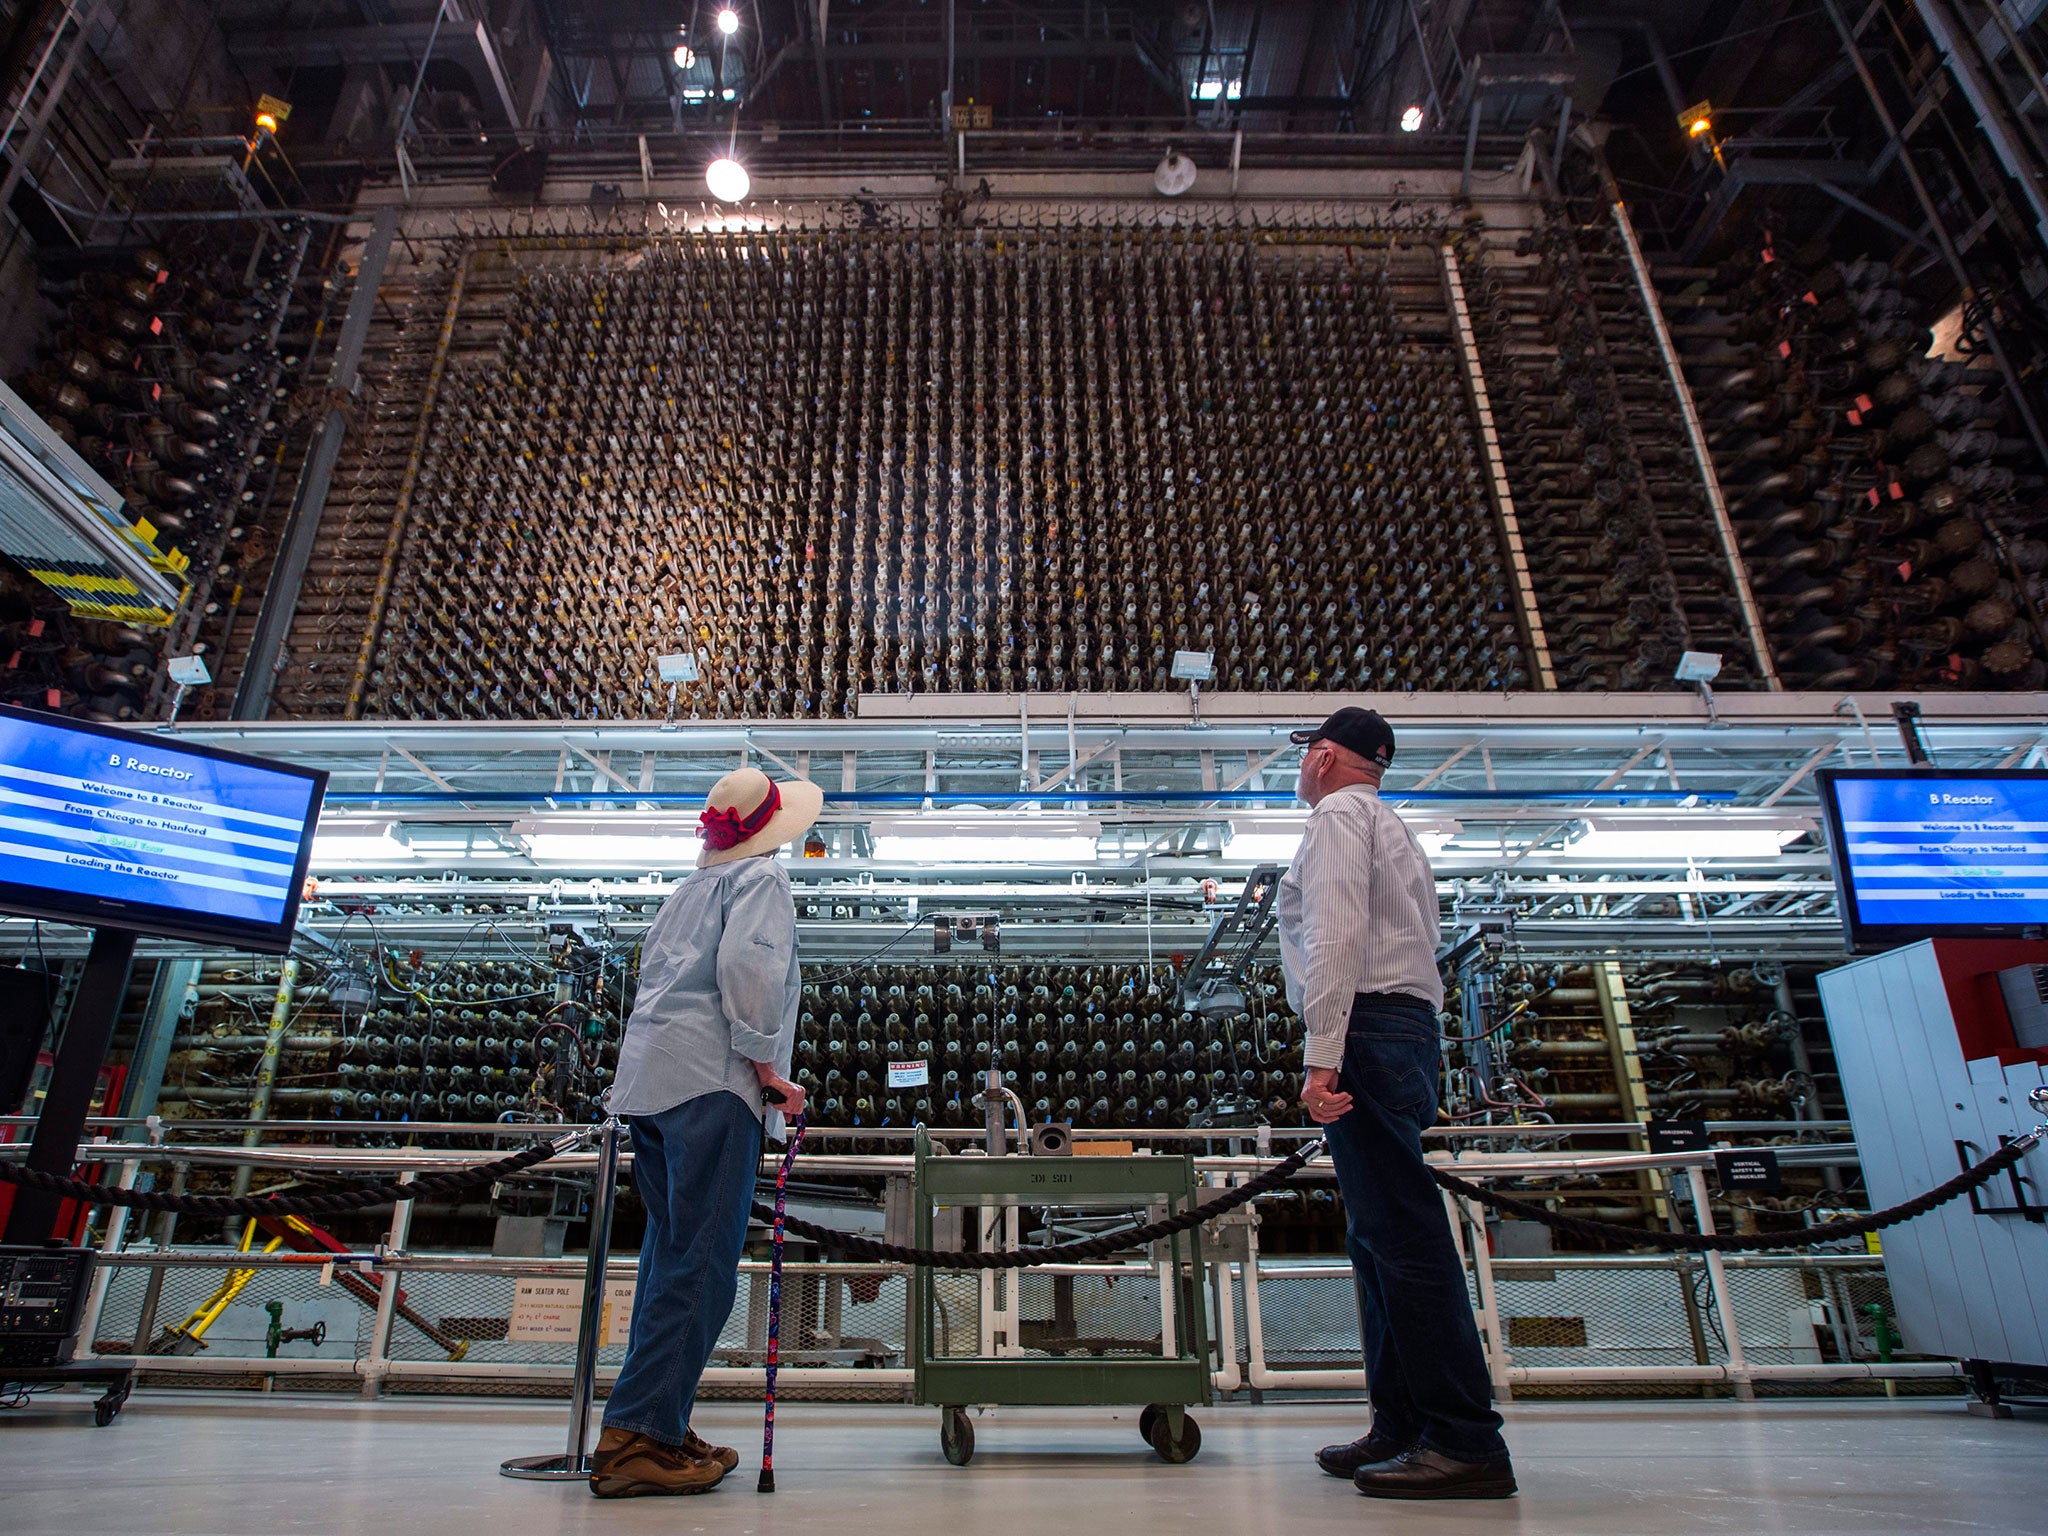 Visitors look at the core of Hanford's historic B Reactor, the world's first, full-scale nuclear reactor, on the Hanford Site in Washington